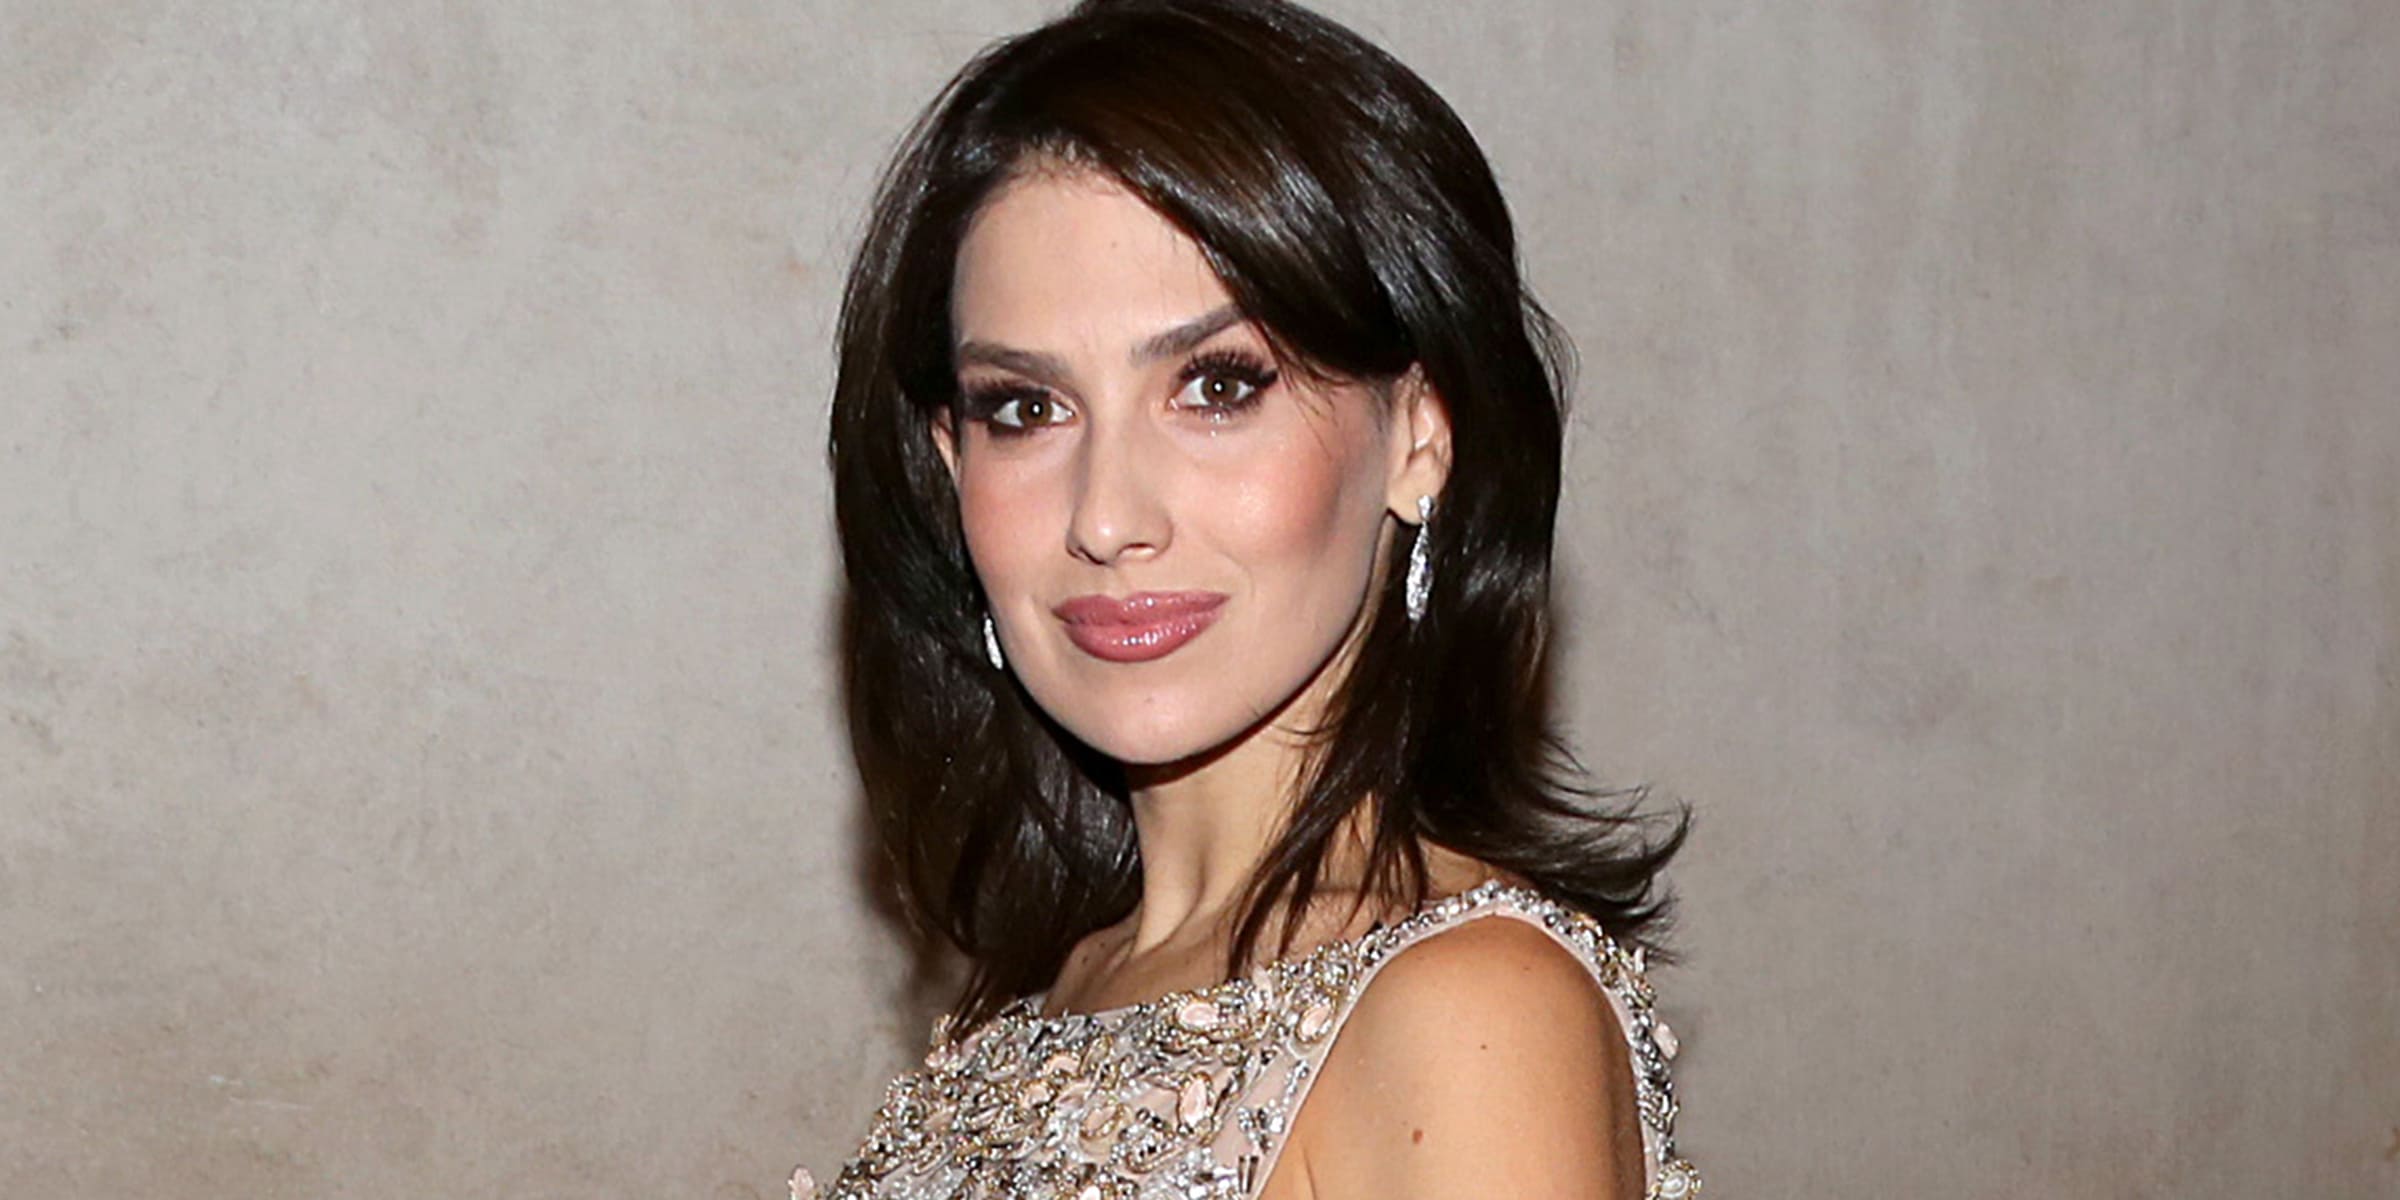 Hilaria Baldwin West Age, Height, Wife, Family – Biographyprofiles